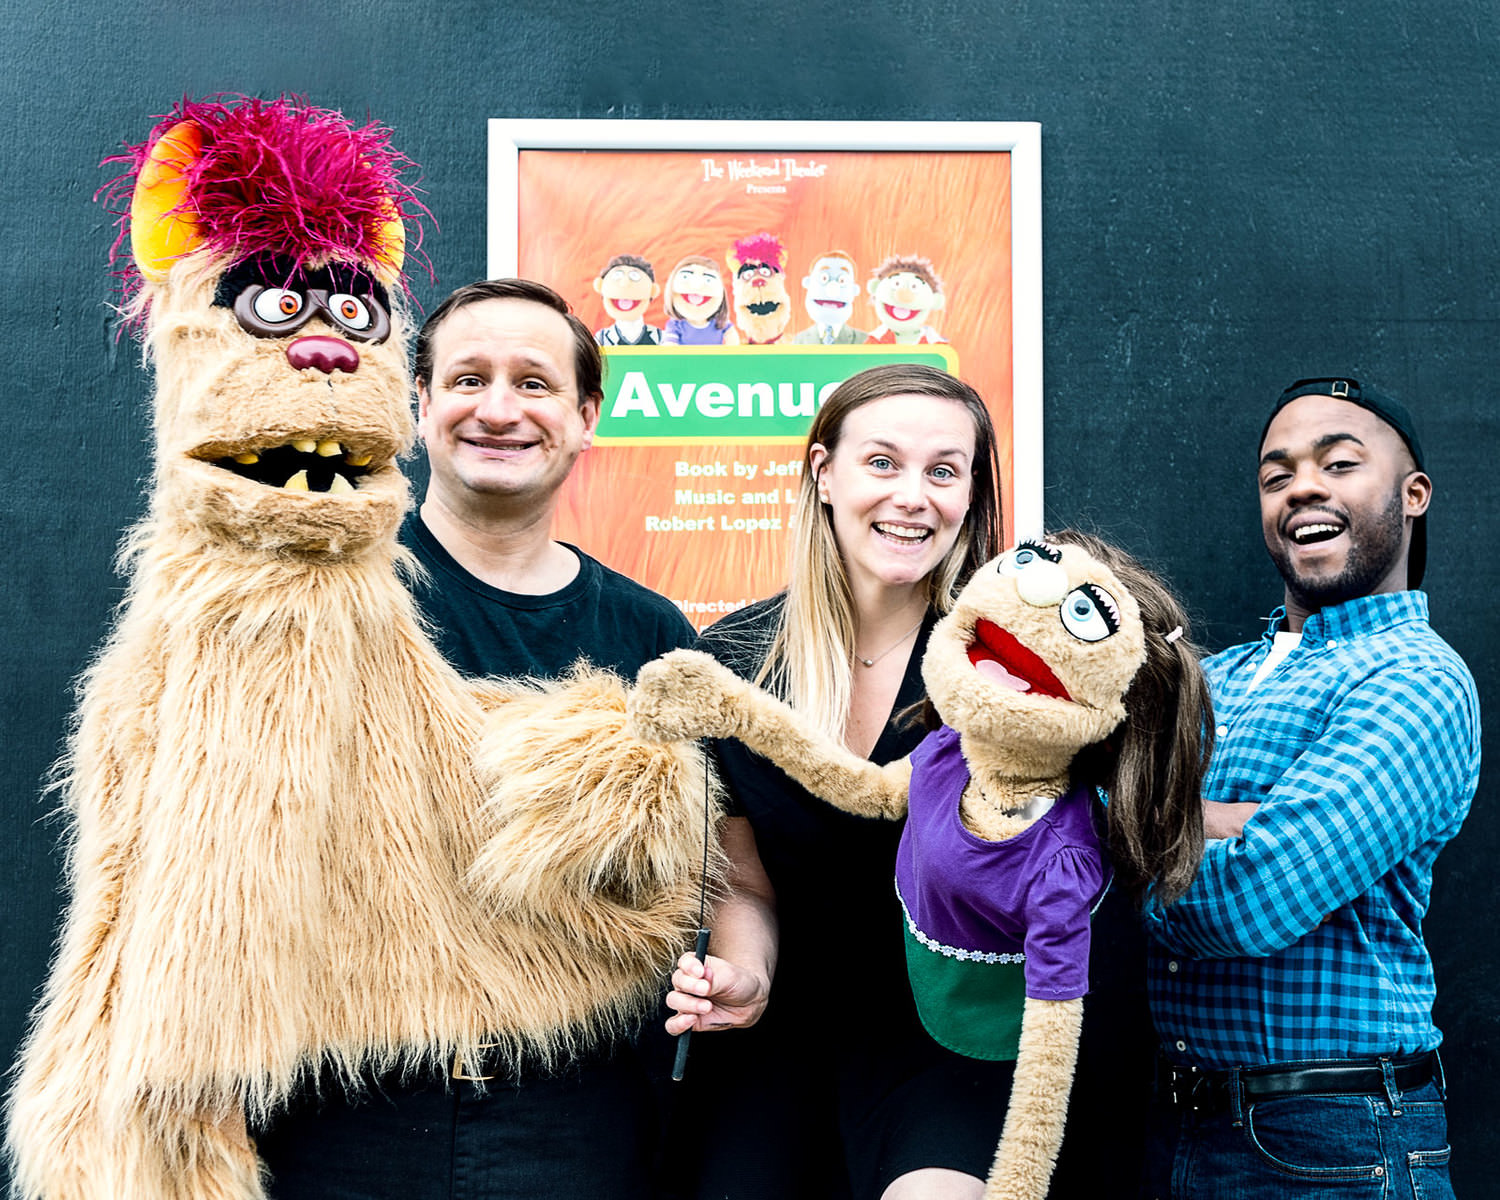 Drew Ellis (Trekkie), Heidi Wallace Leftwich (Kate Monster), and Willie Lucius (Gary Coleman) are part of the cast of Avenue Q, opening June 14 at The Weekend Theater in Little Rock. 1